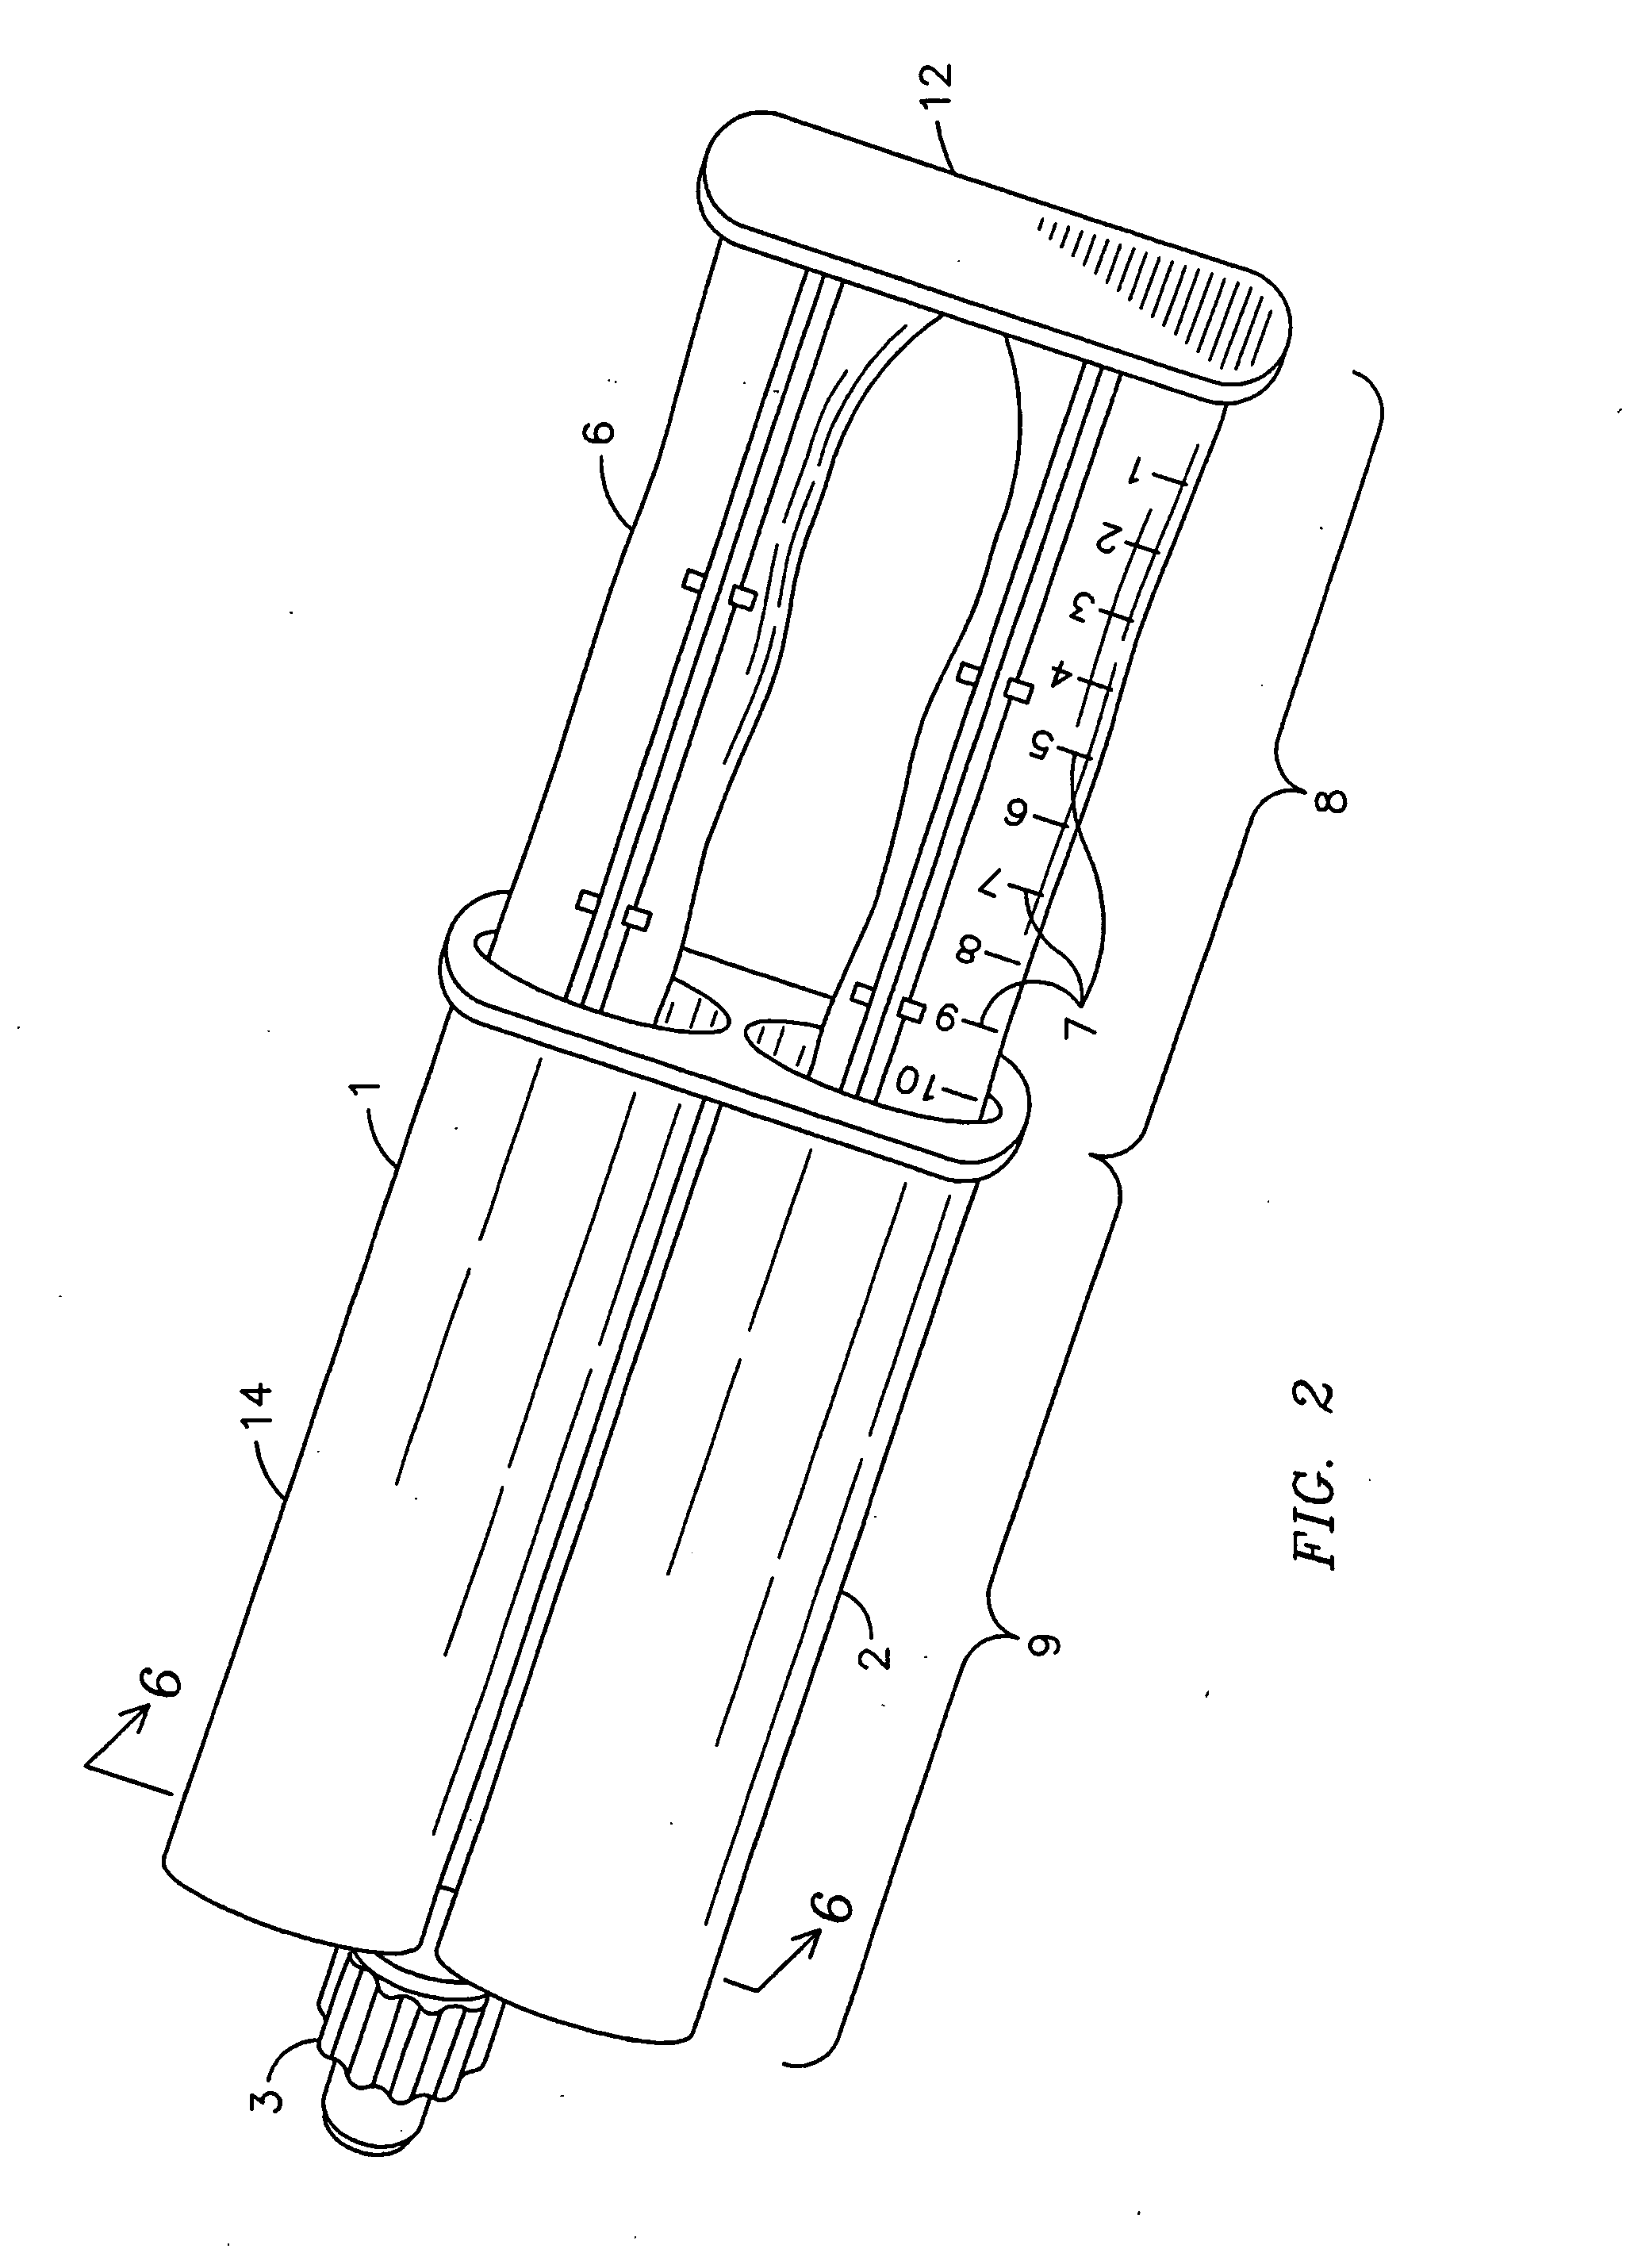 Antibacterial/anti-infalmmatory composition and method